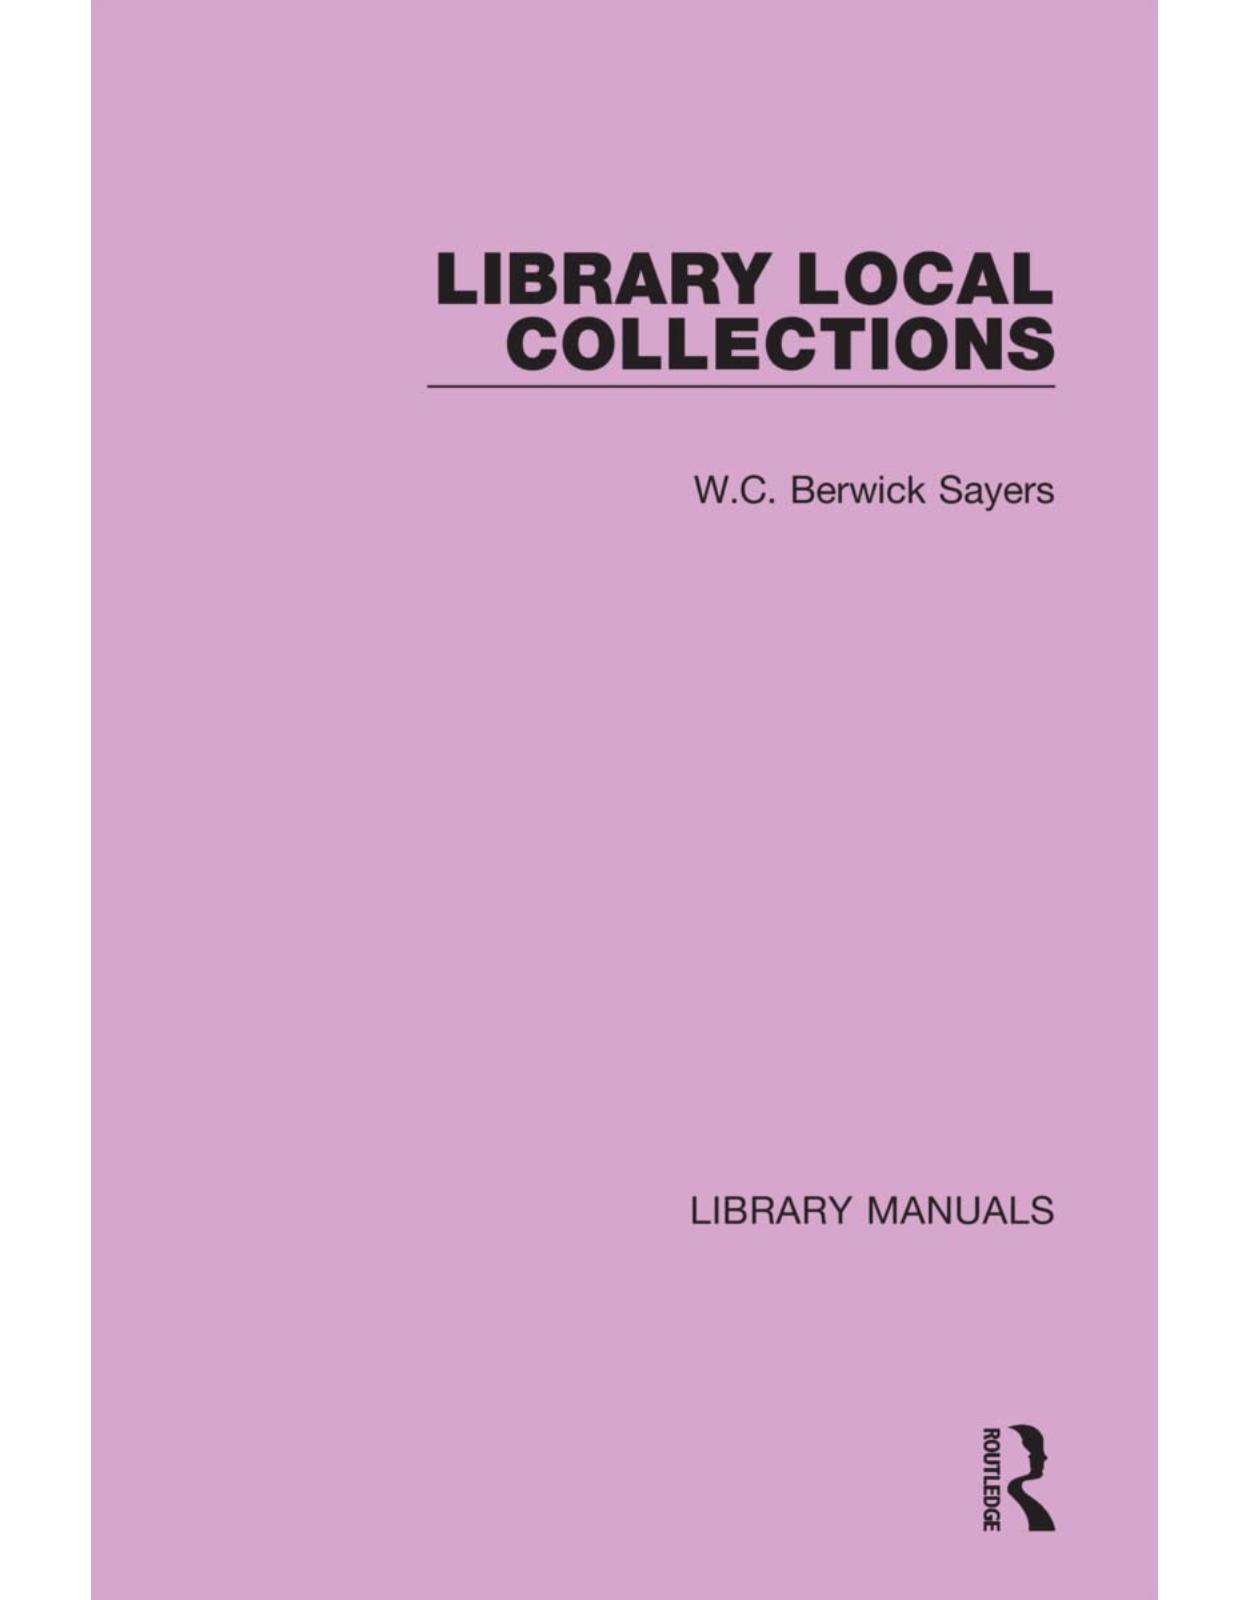 Library Local Collections: 8 (Library Manuals)